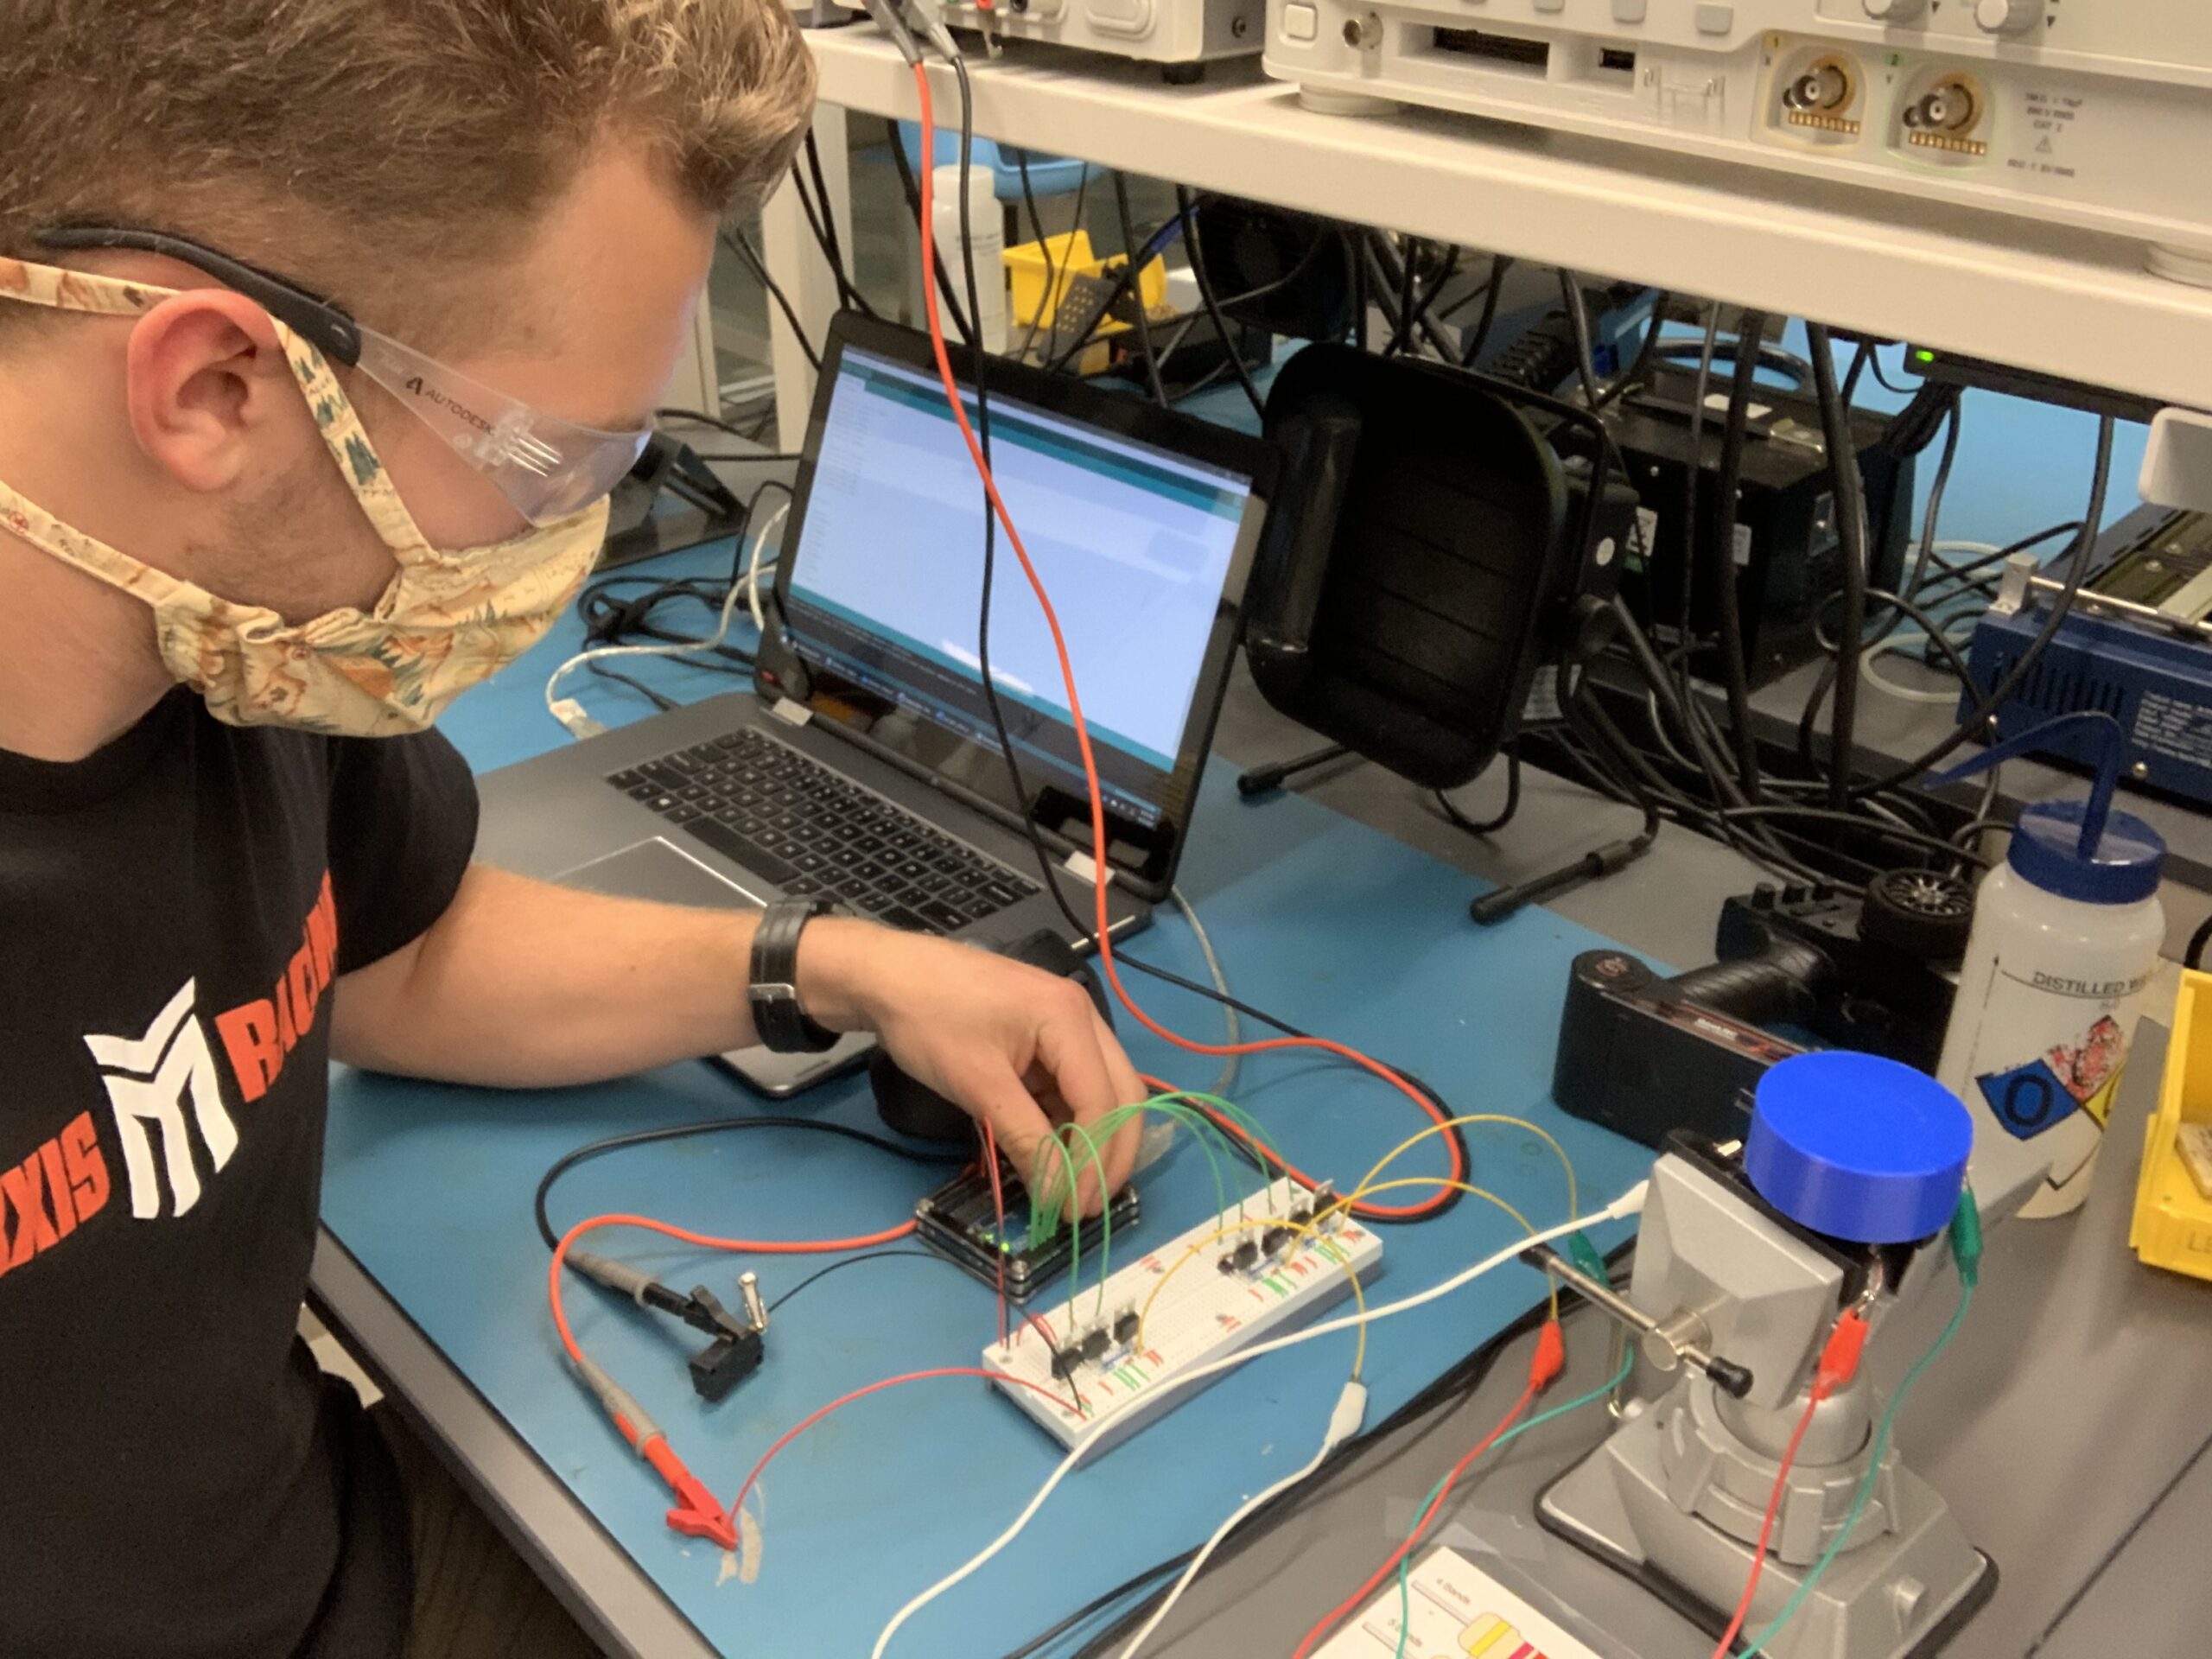 Luke prototyping the controller for his custom brushless DC motor in the Electronics Lab